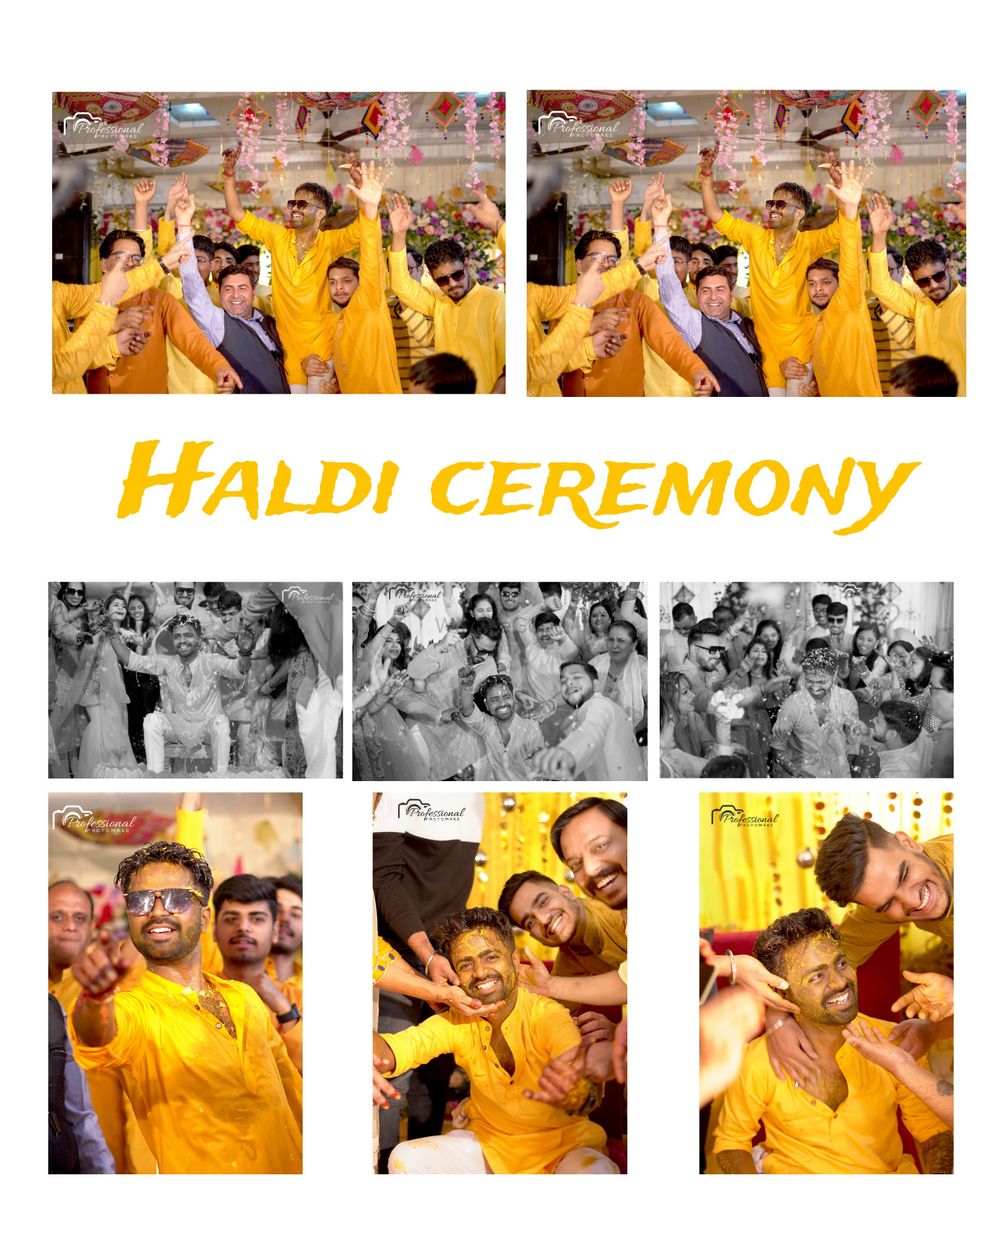 Photo From haldi ceremony - By Professional Photomake 